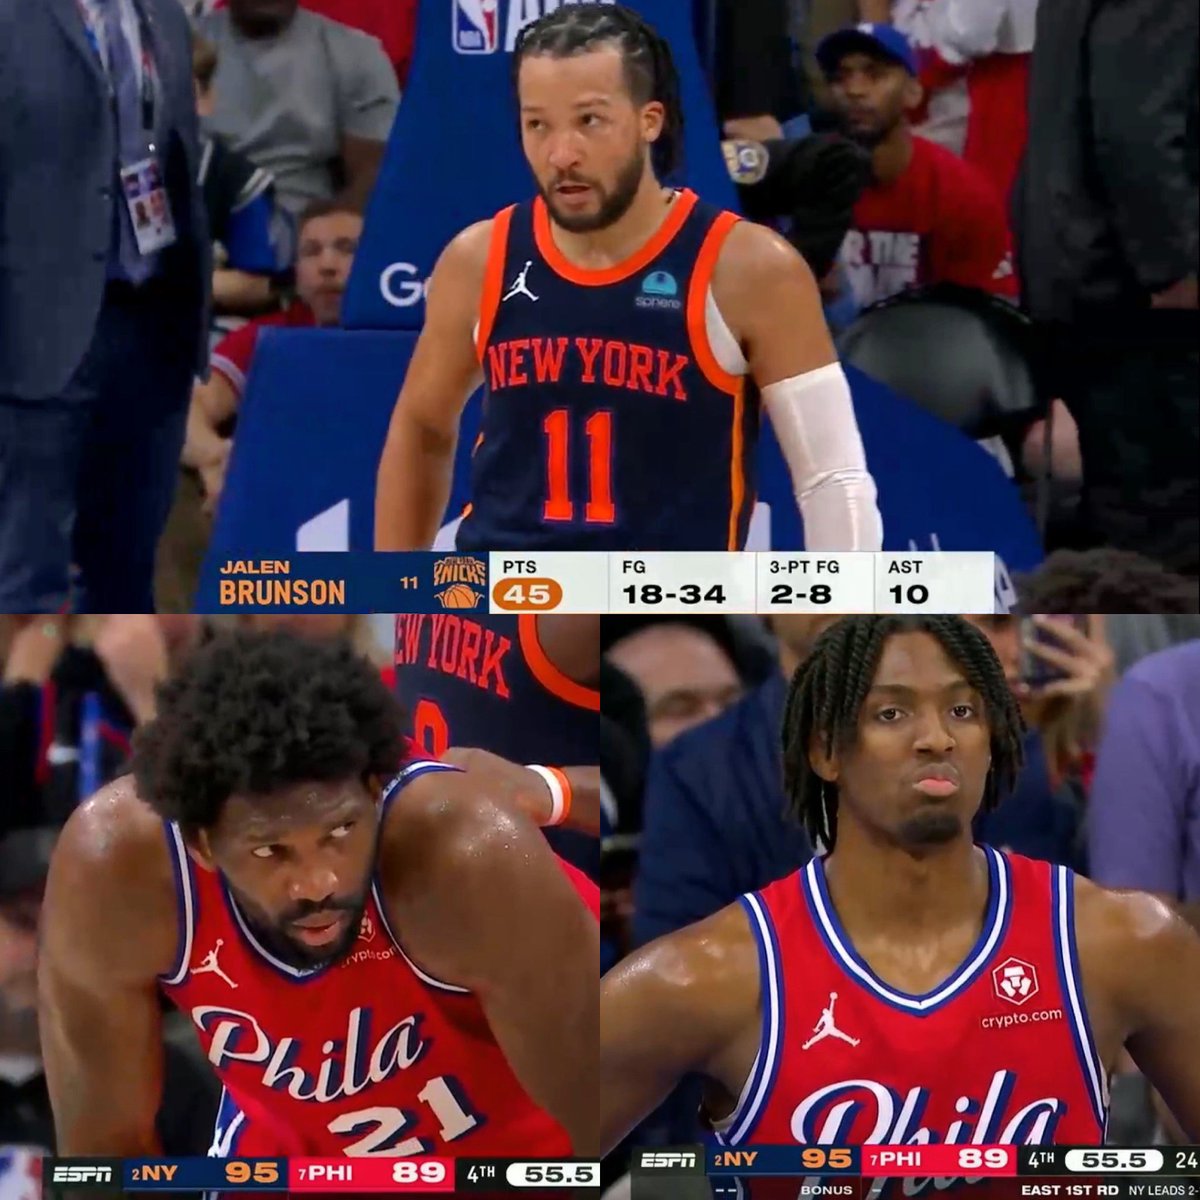 The Sixers might be in trouble. That game 2 loss will come back to haunt them. They've dared the shooters to beat them when they hound Brunson and today they stay at home with the shooters and Brunson killed them. Tough.